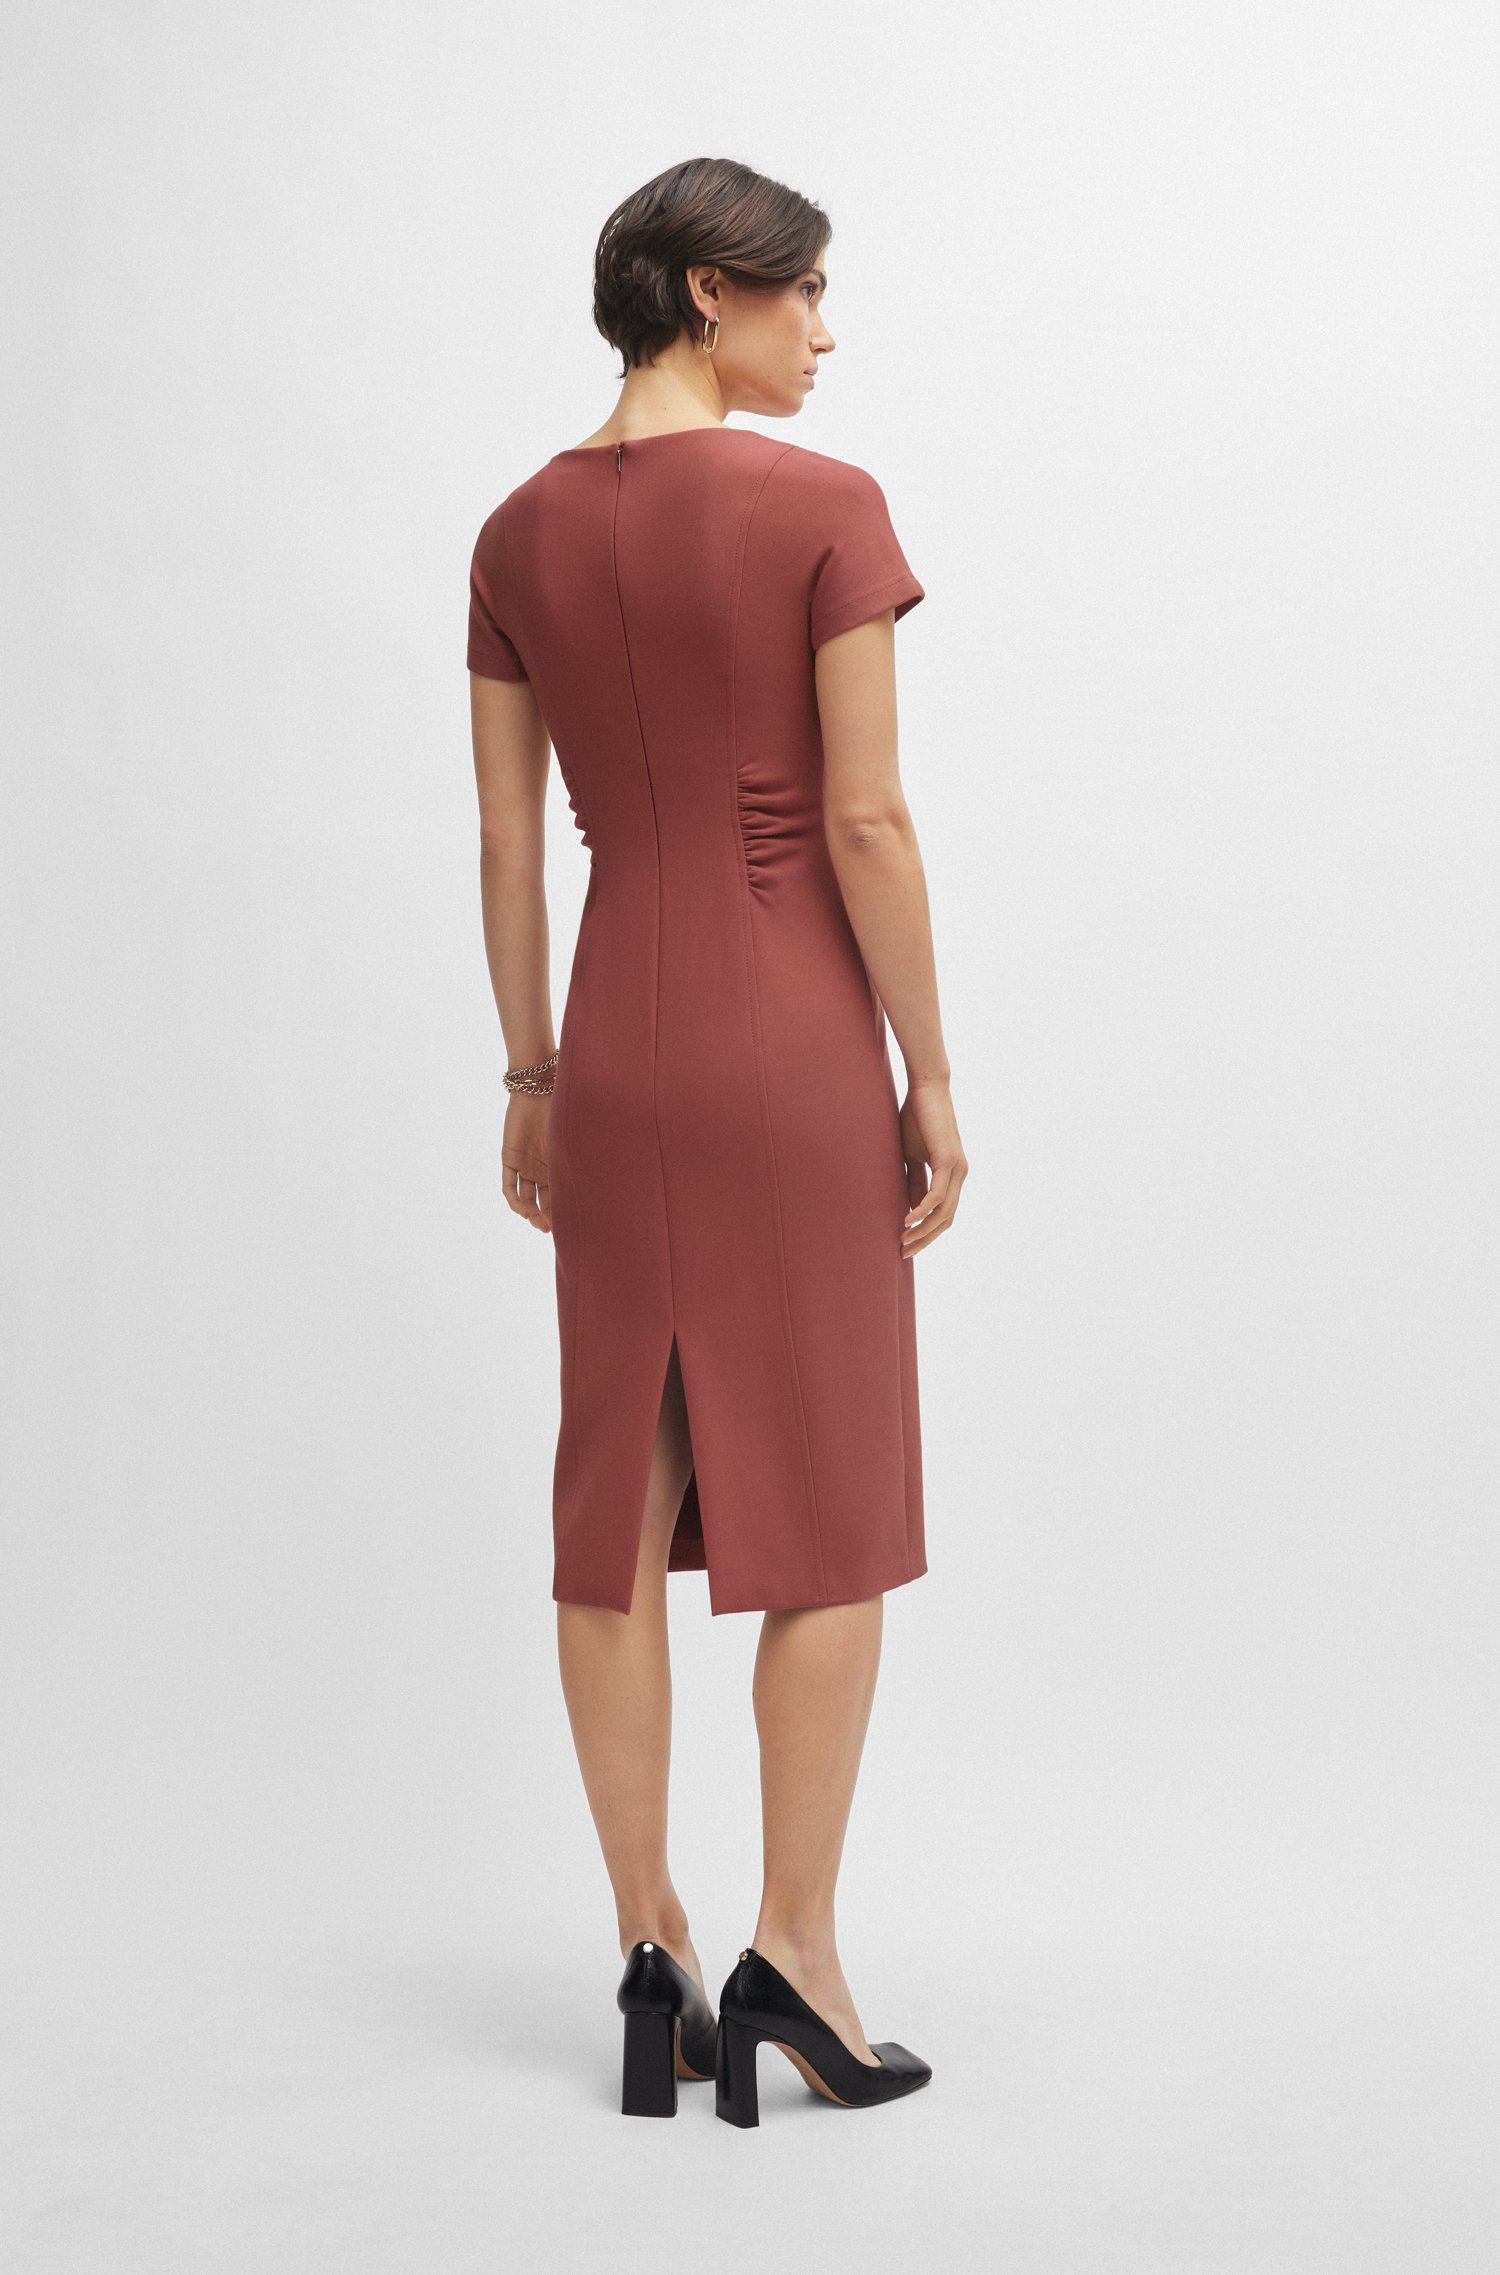 Slit-front business dress with gathered details